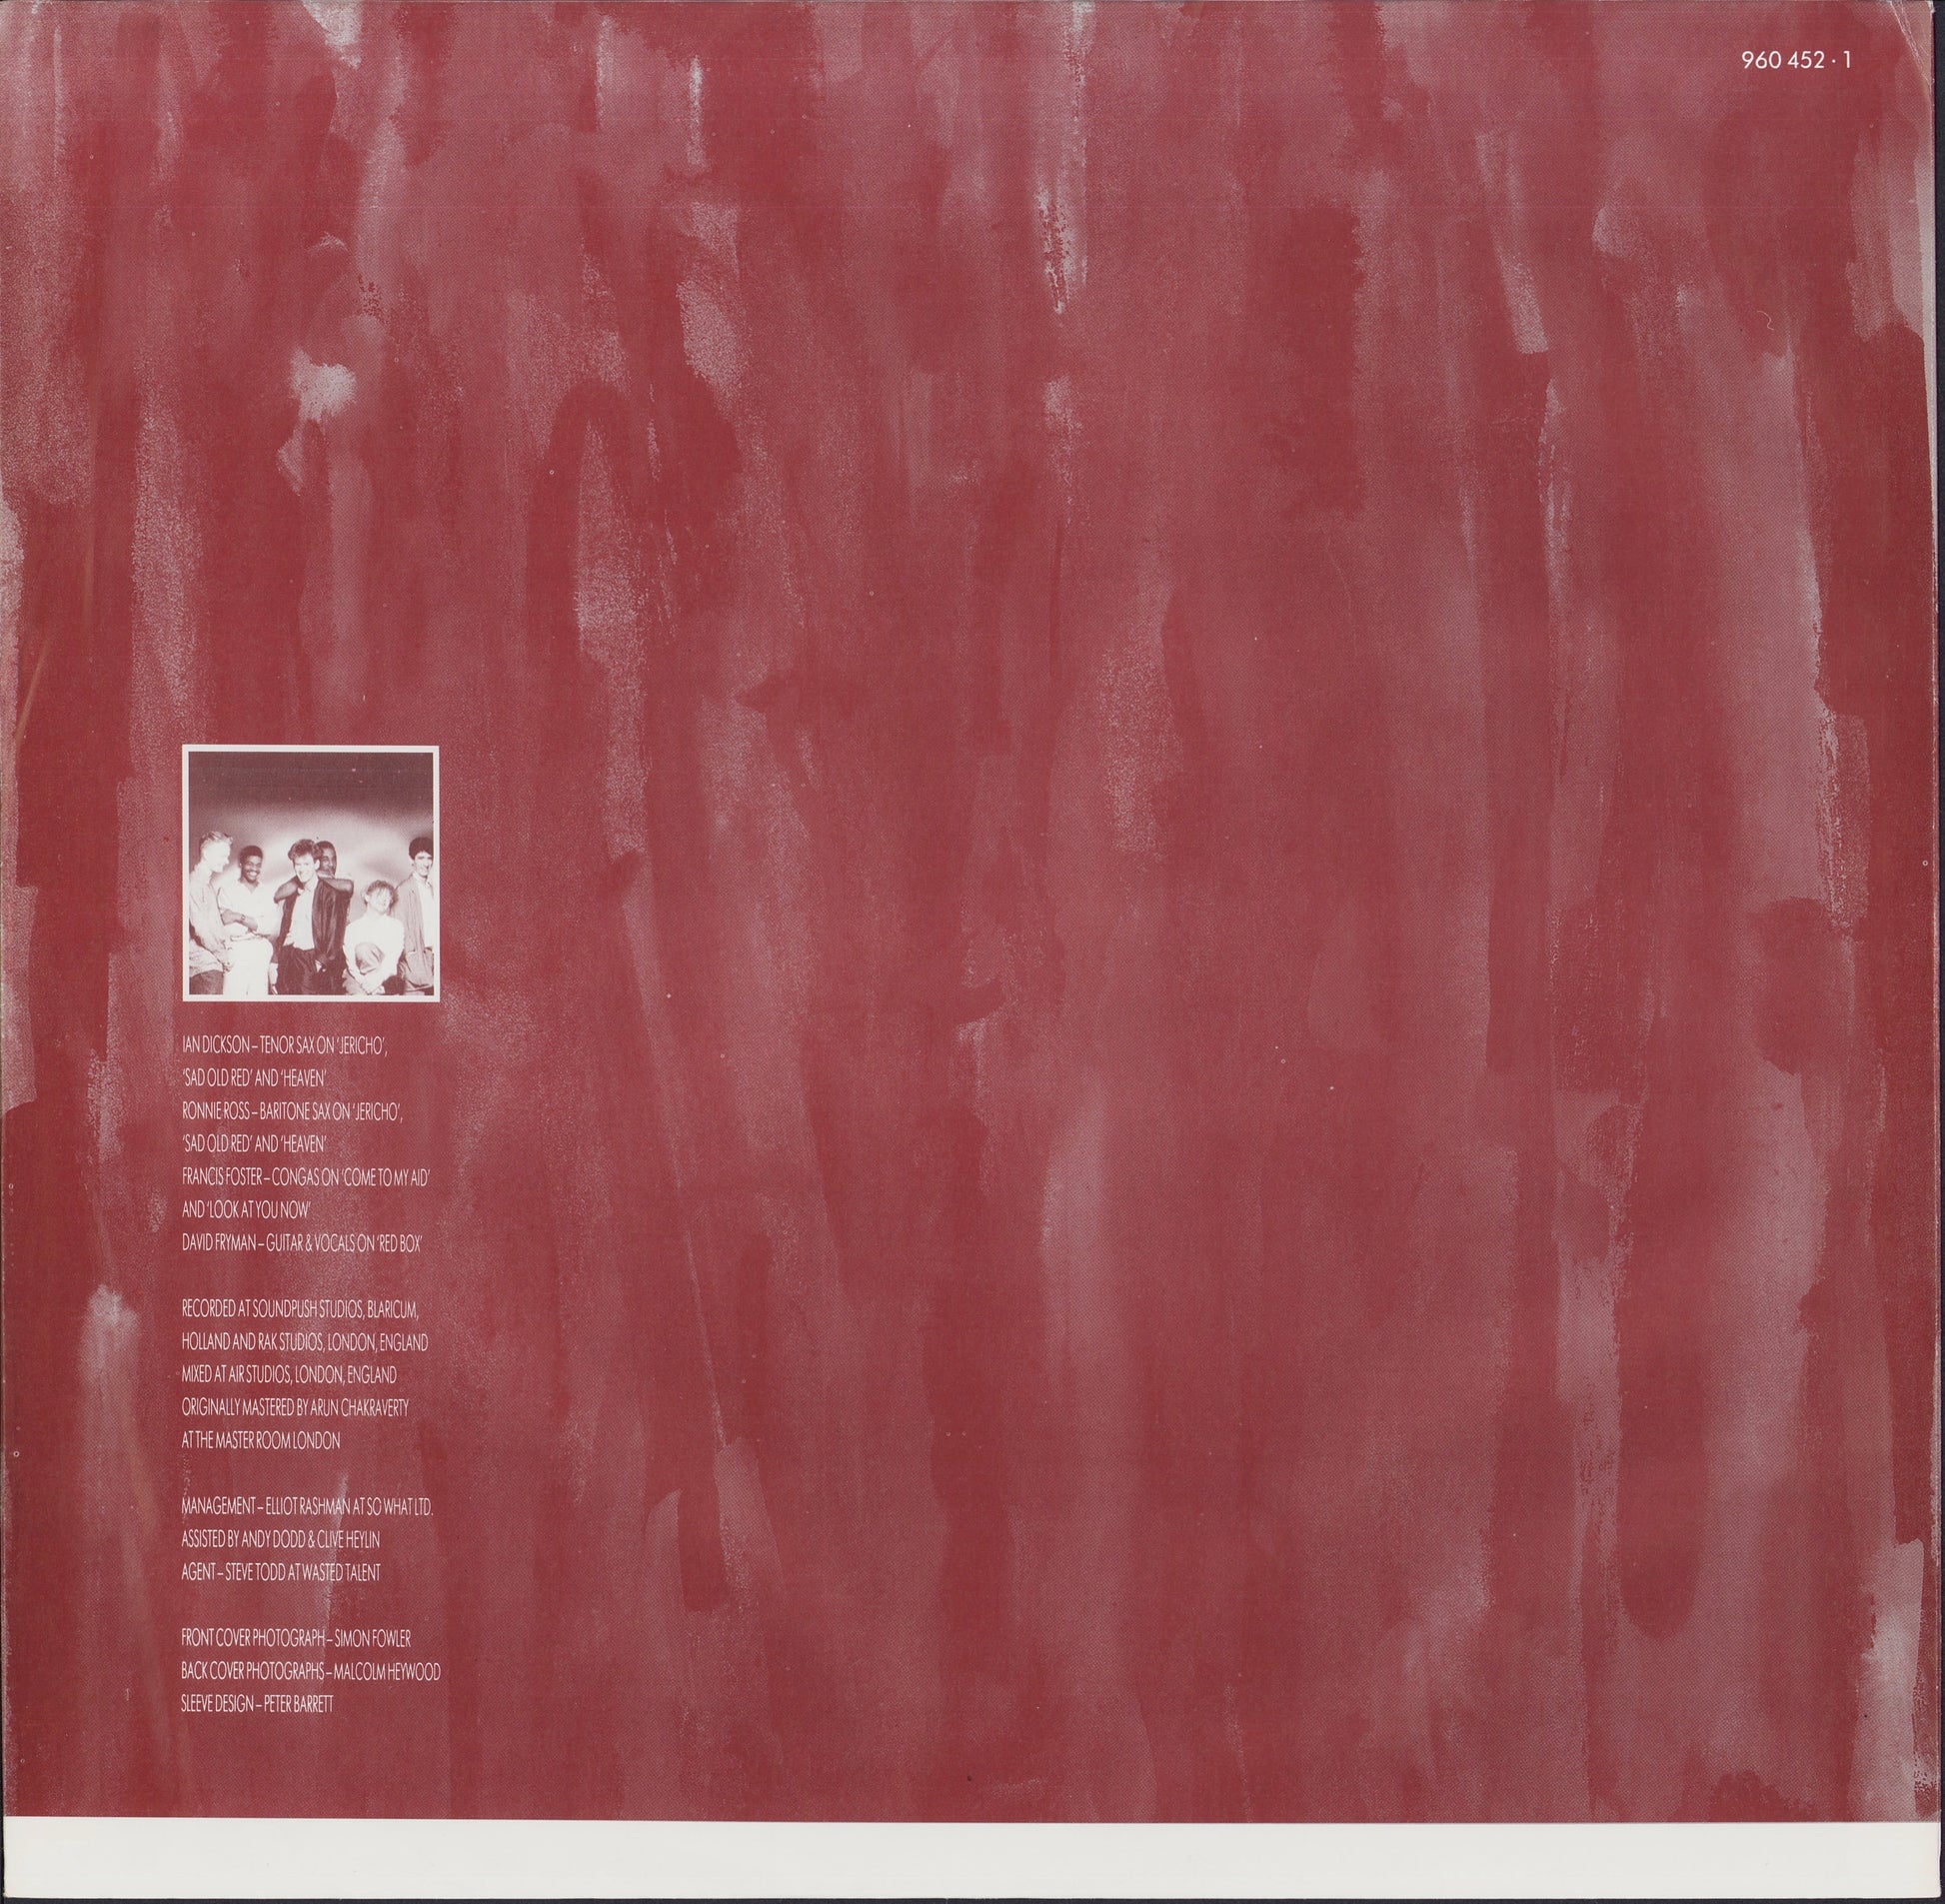 Simply Red ‎- Picture Book Vinyl LP